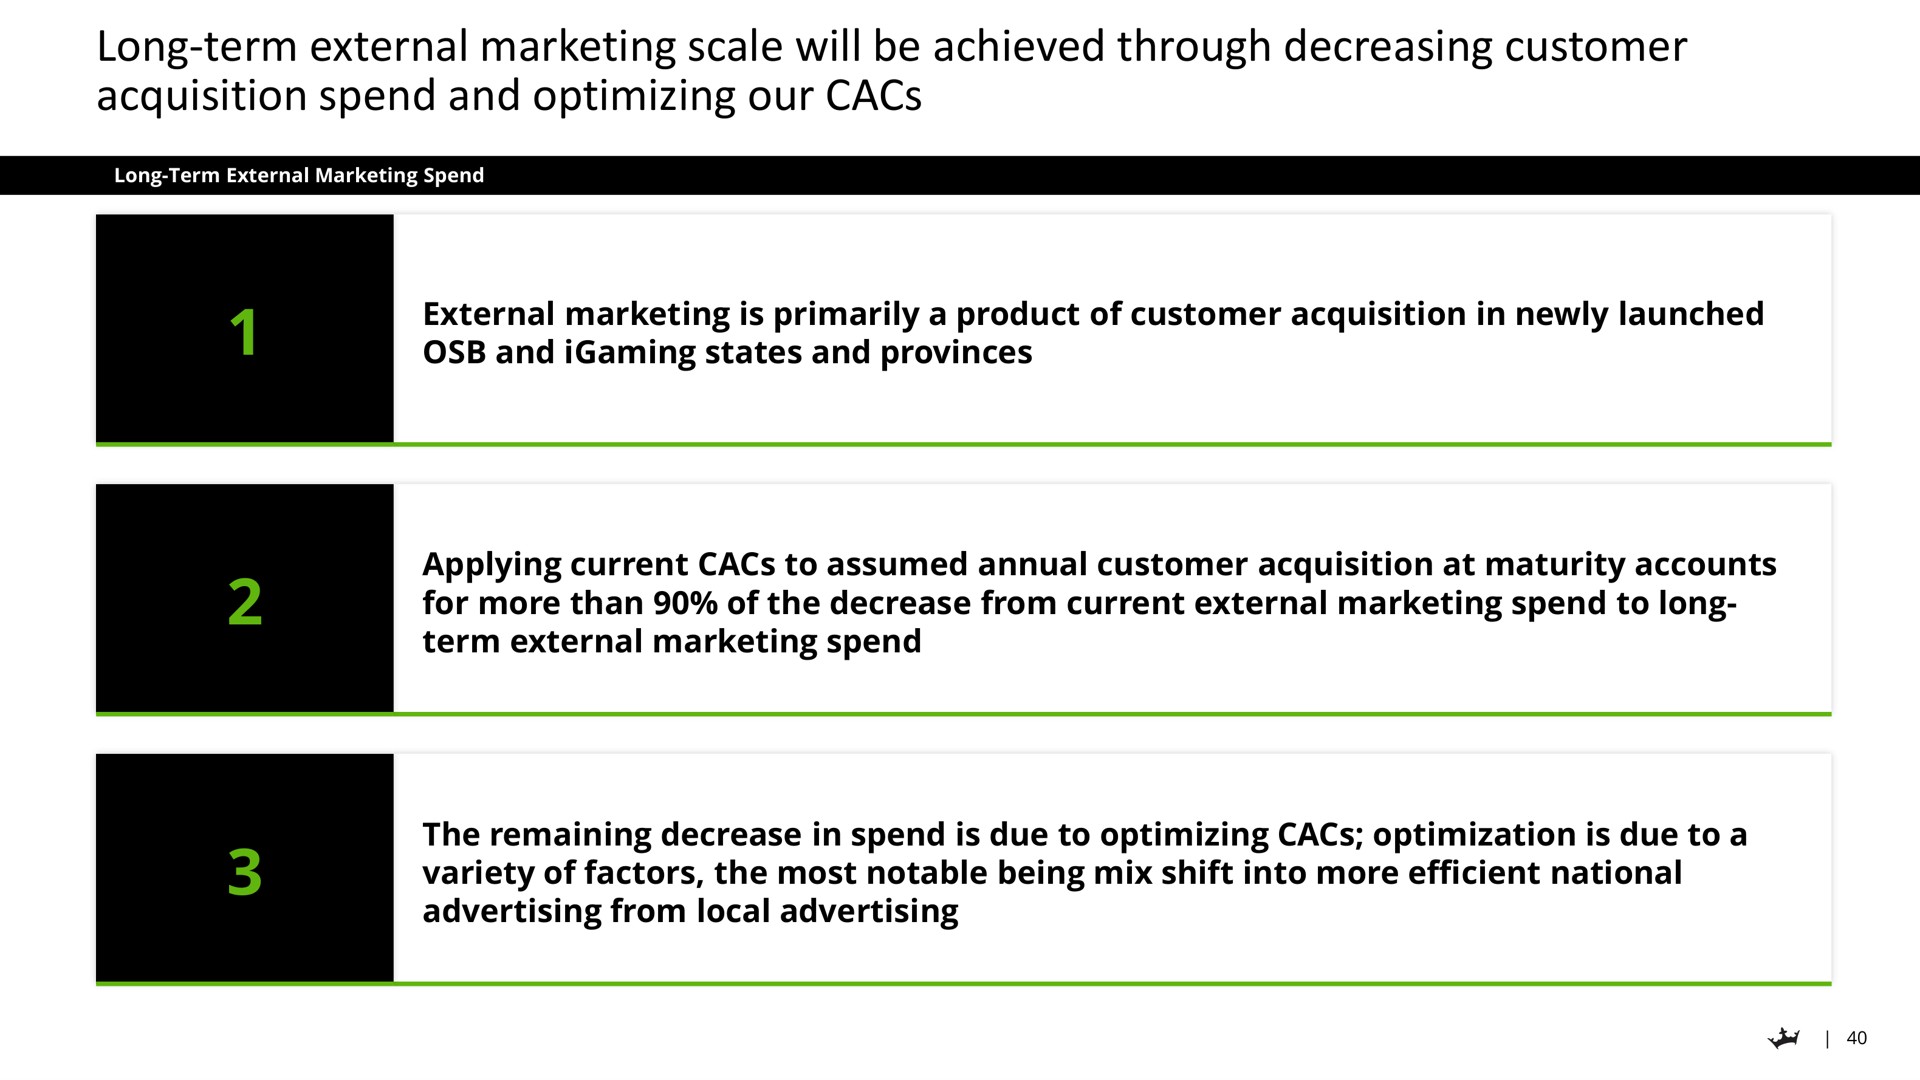 long term external marketing scale will be achieved through decreasing customer acquisition spend and optimizing our is primarily a product of in newly launched states provinces applying current to assumed annual at maturity accounts for more than of the decrease from current to long term the remaining decrease in is due to optimization is due toa variety of factors the most notable being mix shift into more efficient national advertising from local advertising | DraftKings